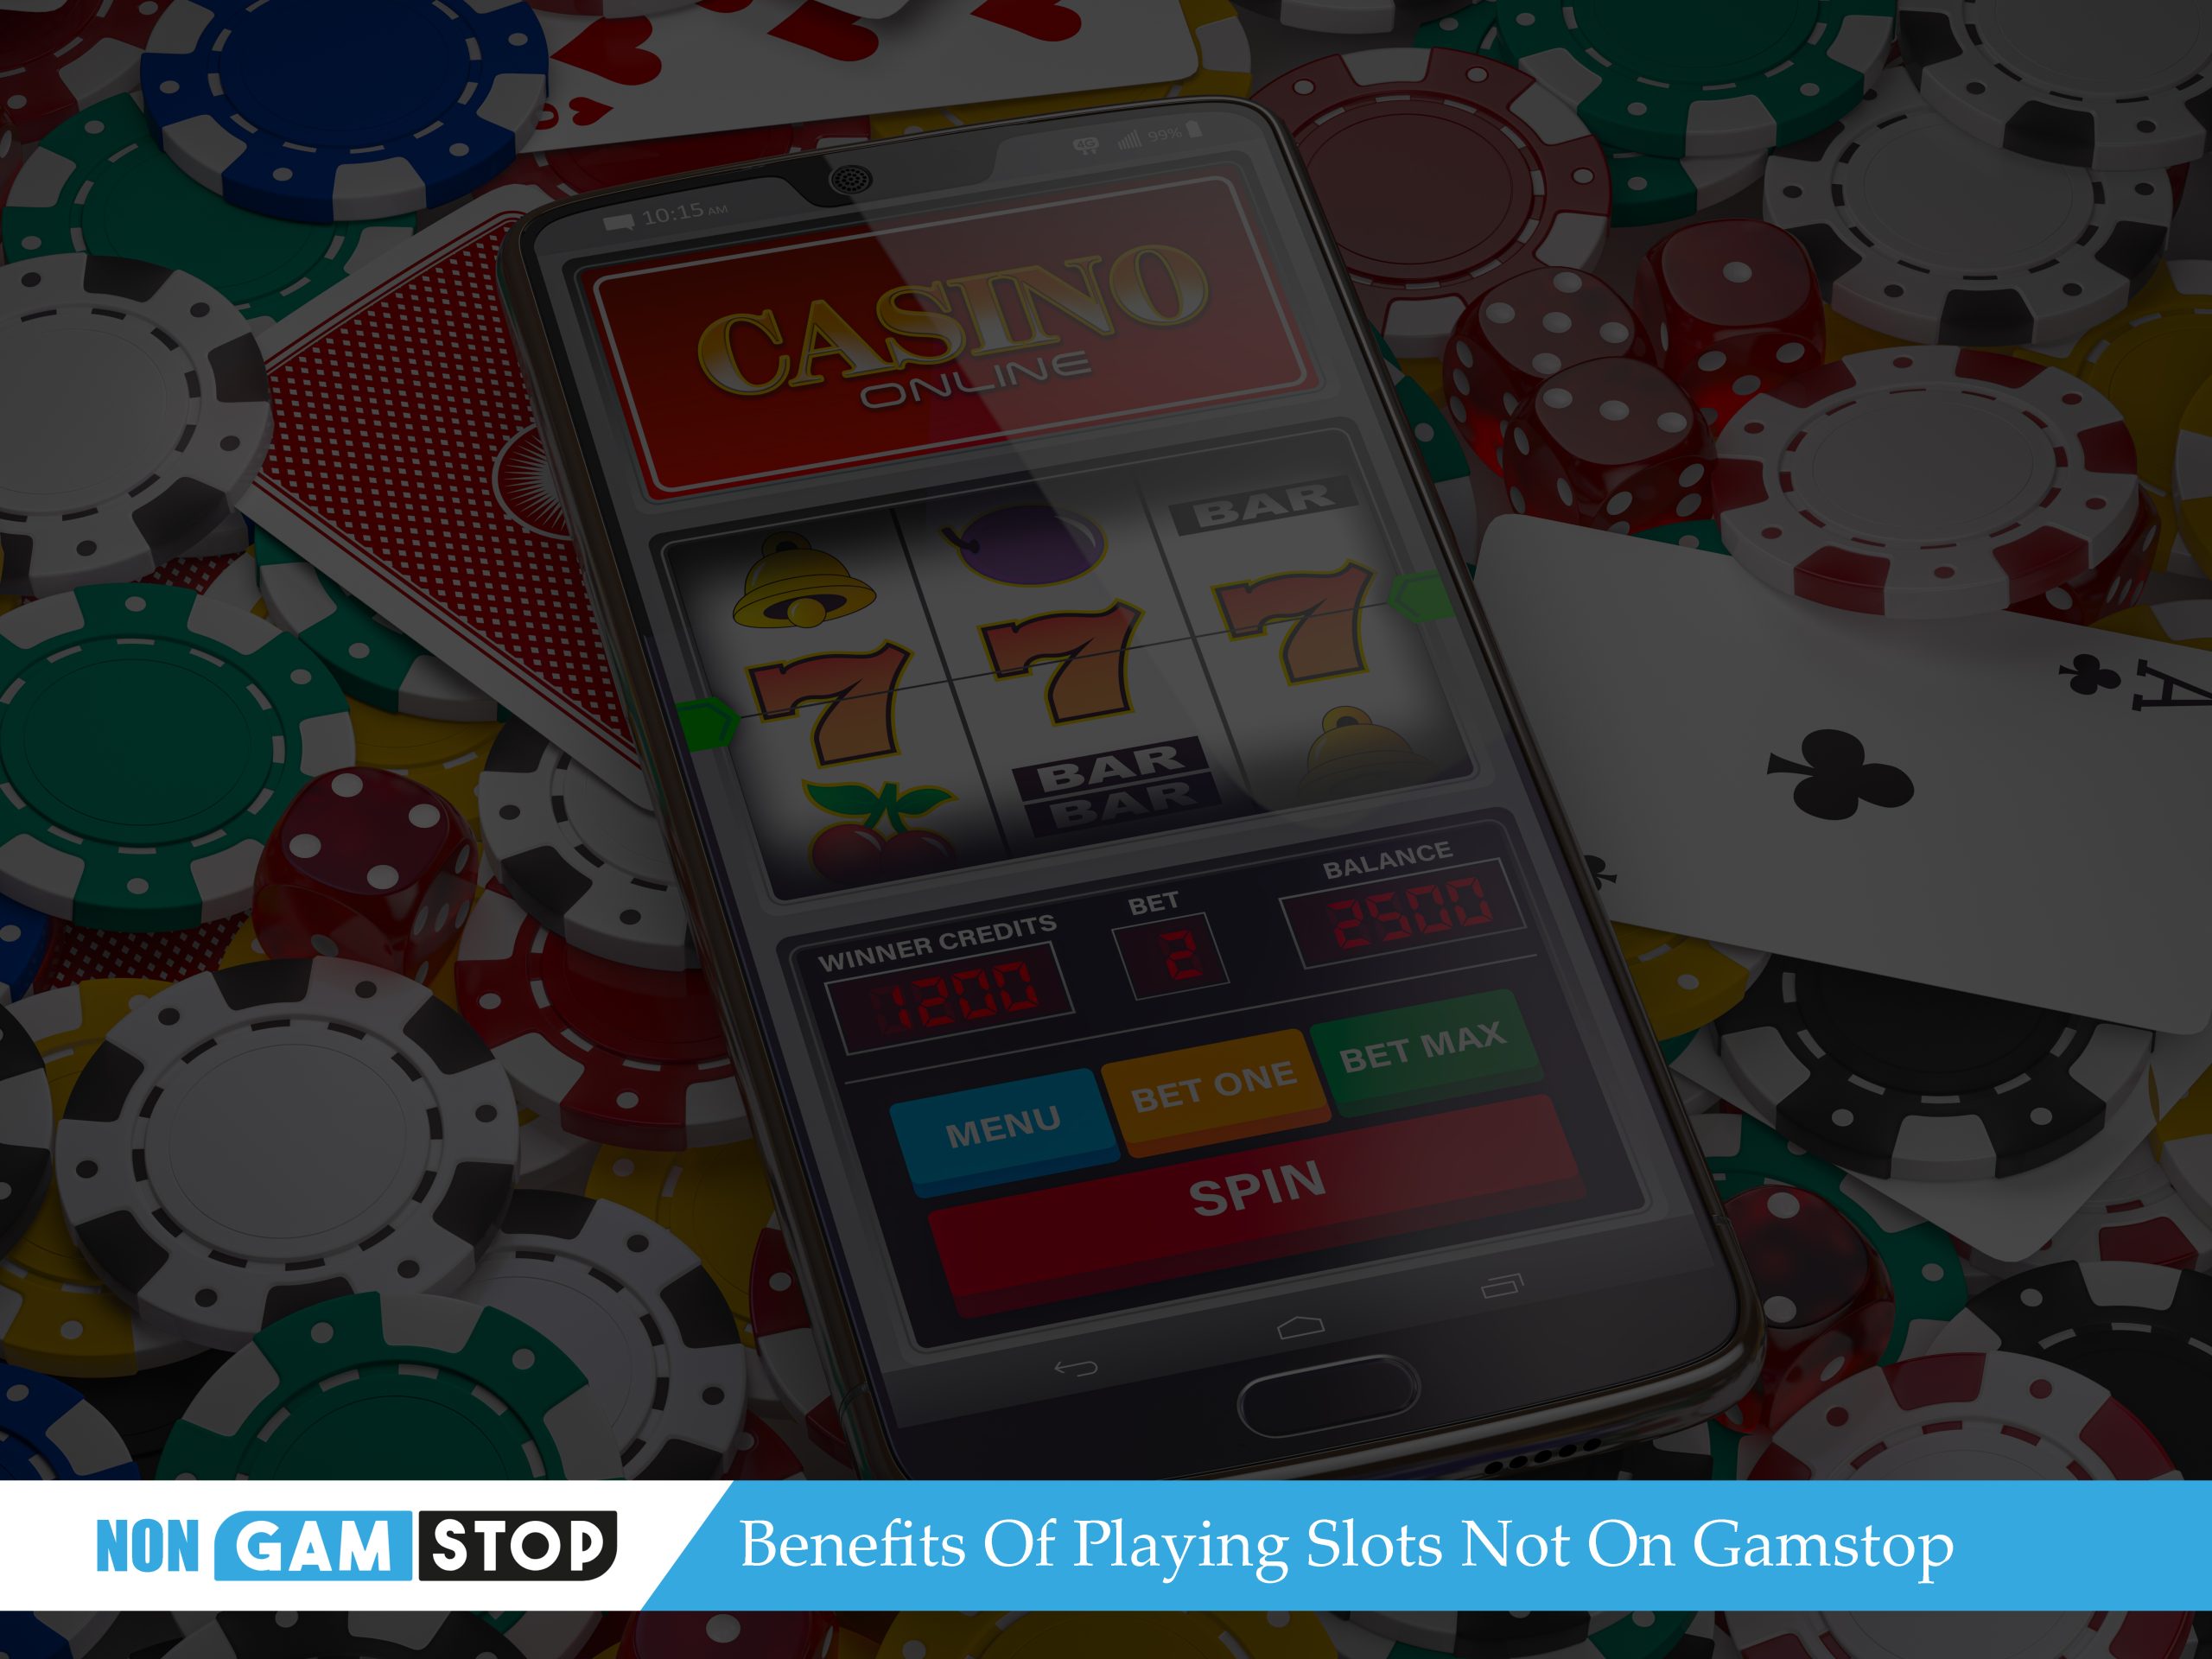 Benefits Of Playing Slots Not On Gamstop